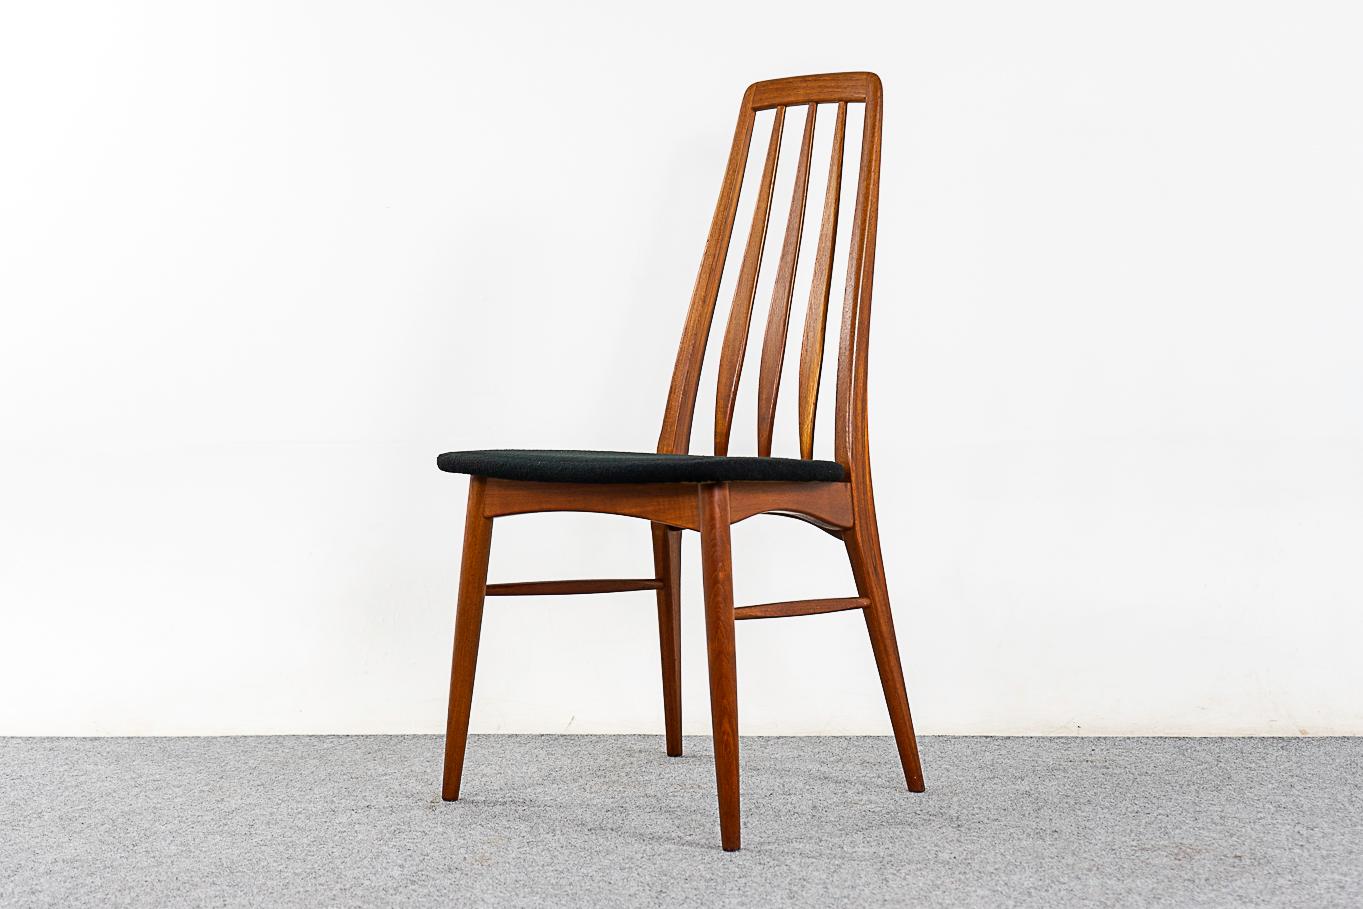 Set of 6 Teak Danish Eva dining chairs by Niels Koefoed, circa 1960's. Iconic and enduring design with beautiful slatted back that taper and curve at a gentle angle. Original upholstery with minor wear. Danish Furniture Maker's control stamp and